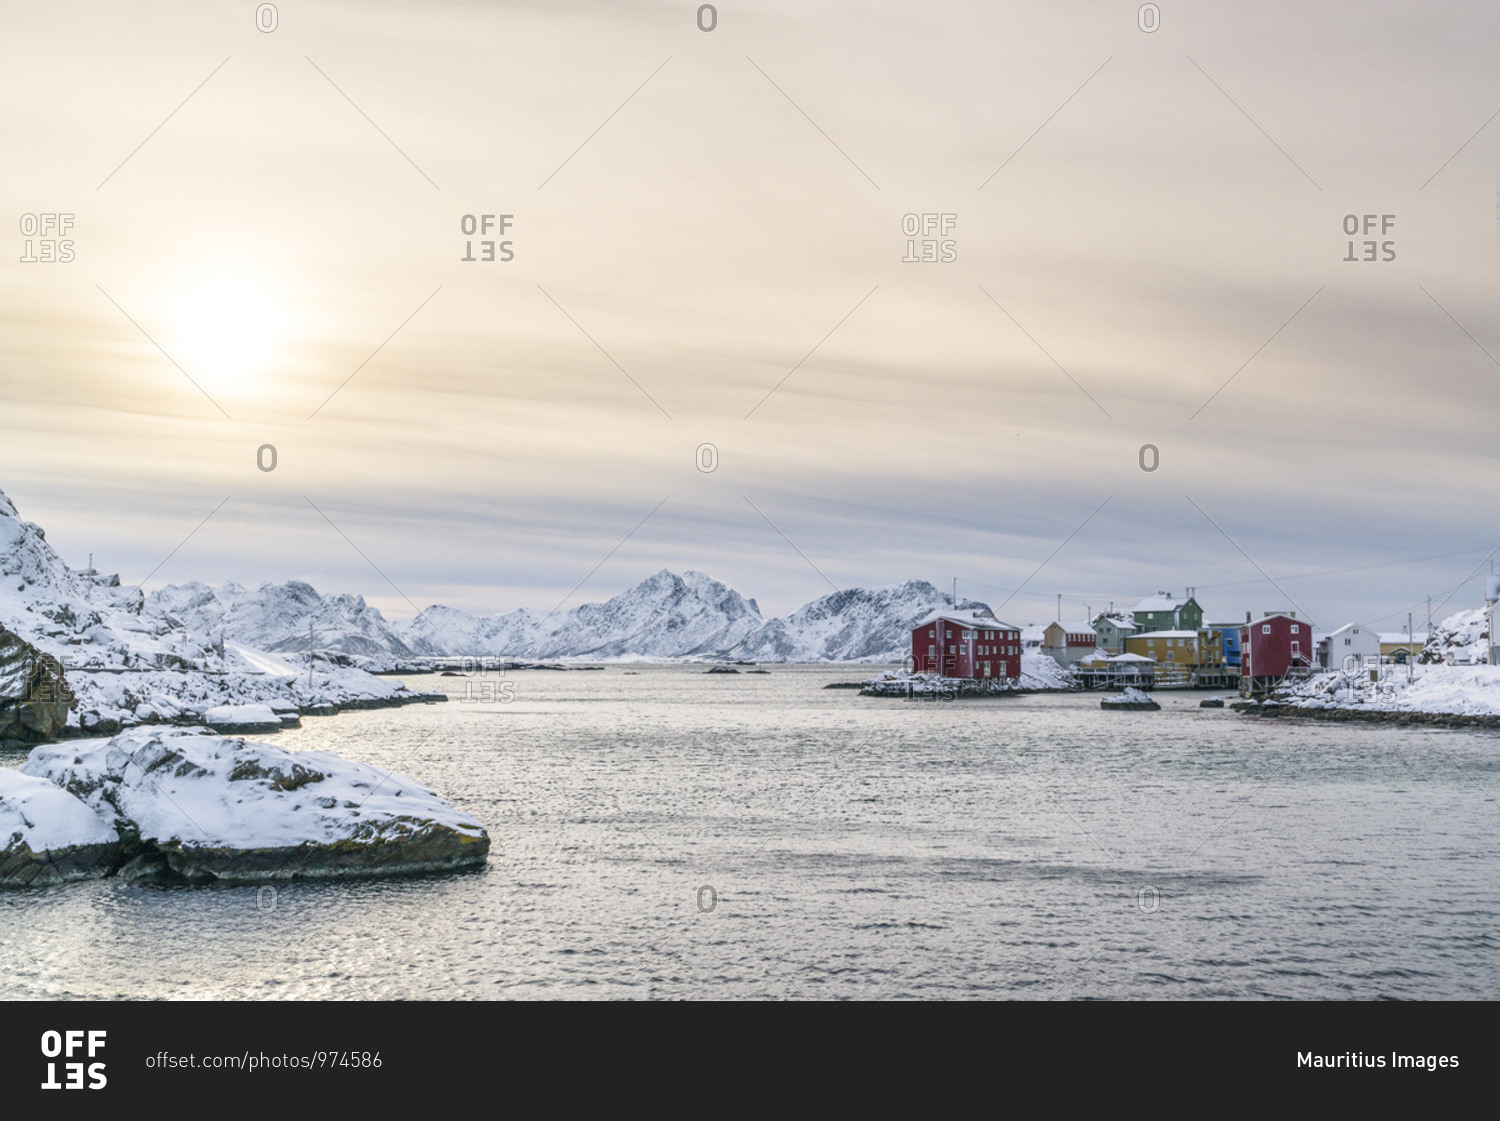 Nyksund is a fishing village on Vesteralen with around 15 inhabitants. The village has been abandoned several times in the past when fishermen no longer saw an adequate livelihood. It has been revived for several years.